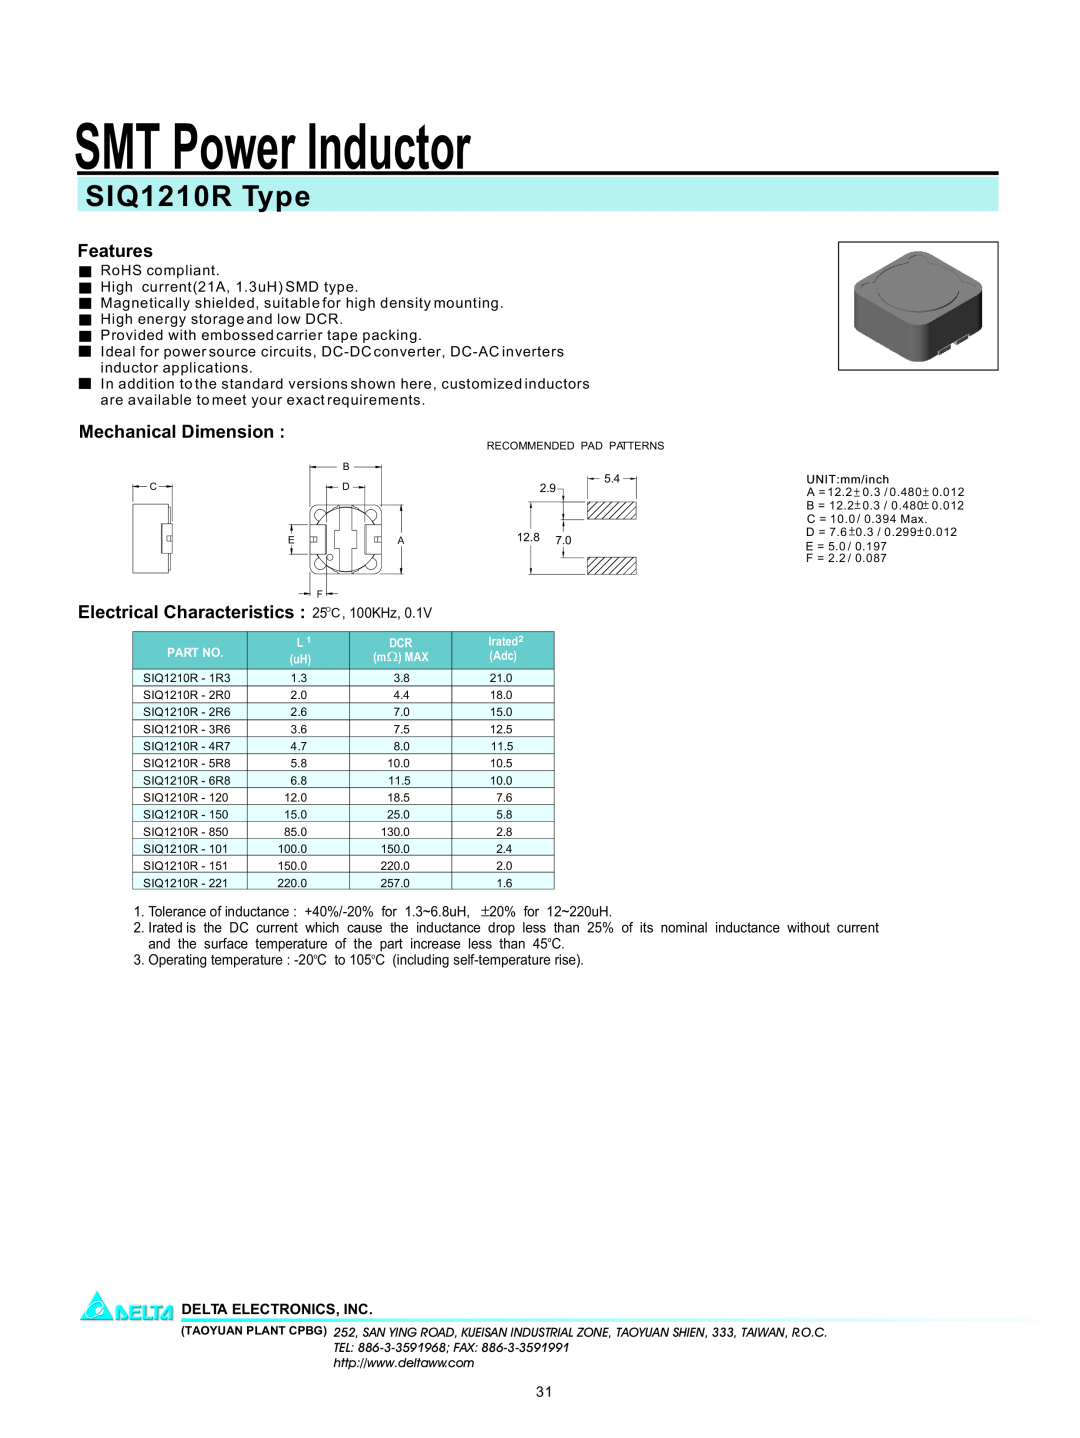 Delta Electronics manual SMT Power Inductor, SIQ1210R Type, Features, Mechanical Dimension, Delta Electronics, Inc 